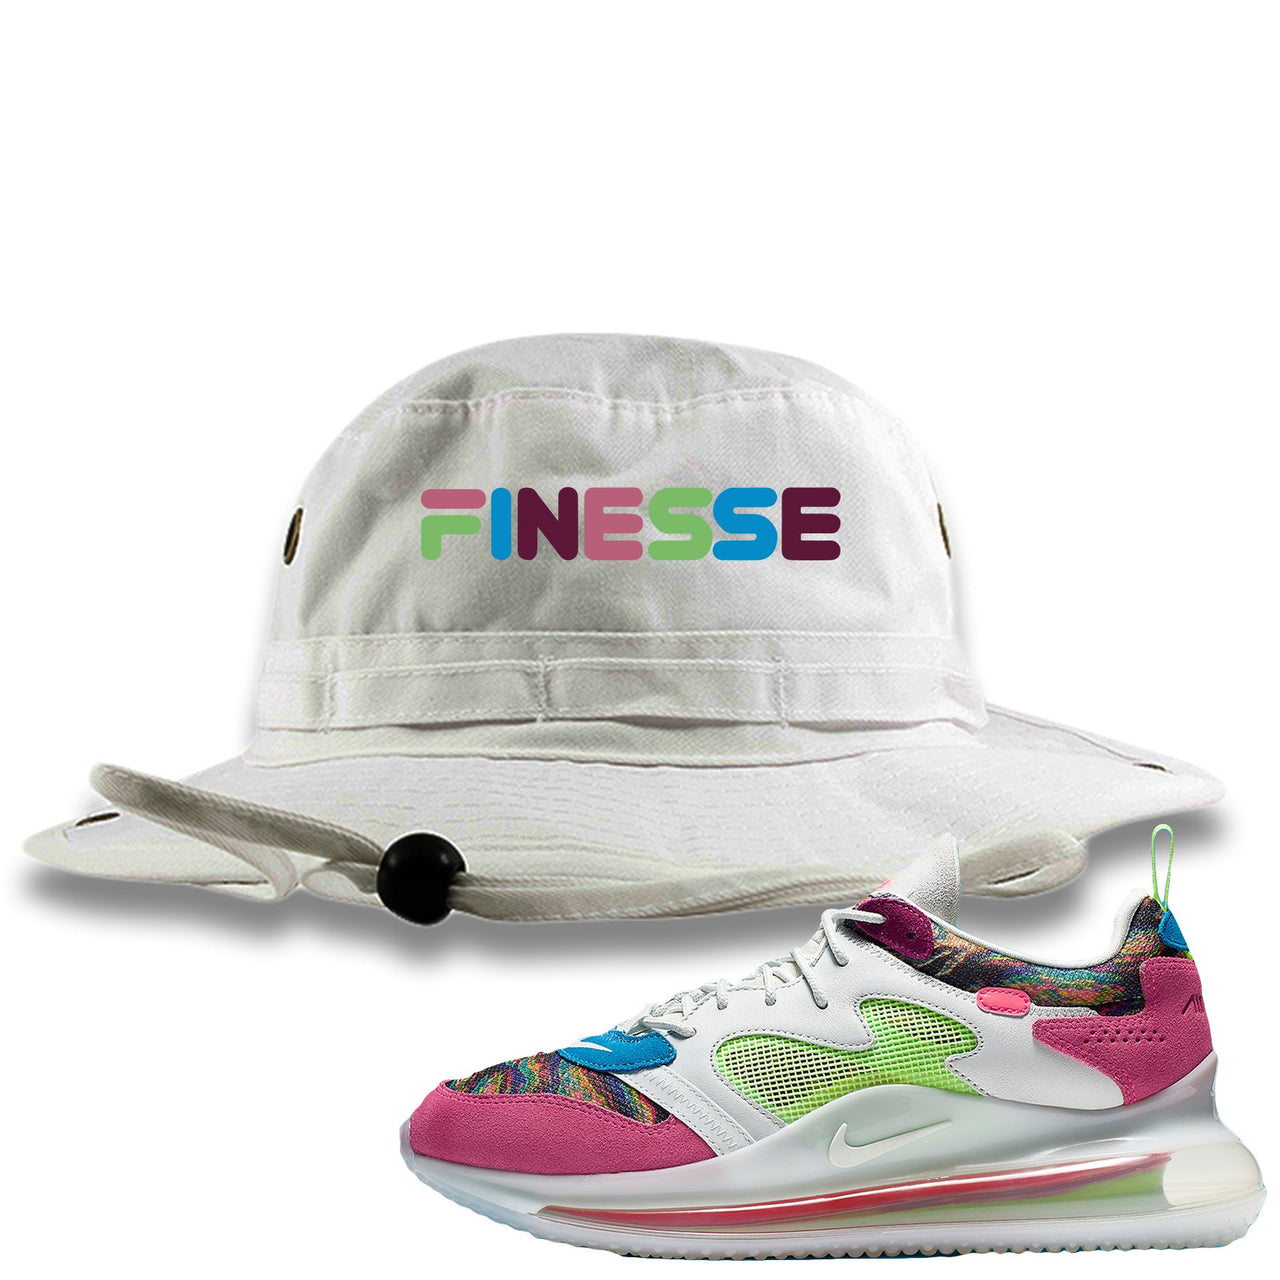 Multi Color Hyper Pink 720s Bucket Hat | Finesse, White